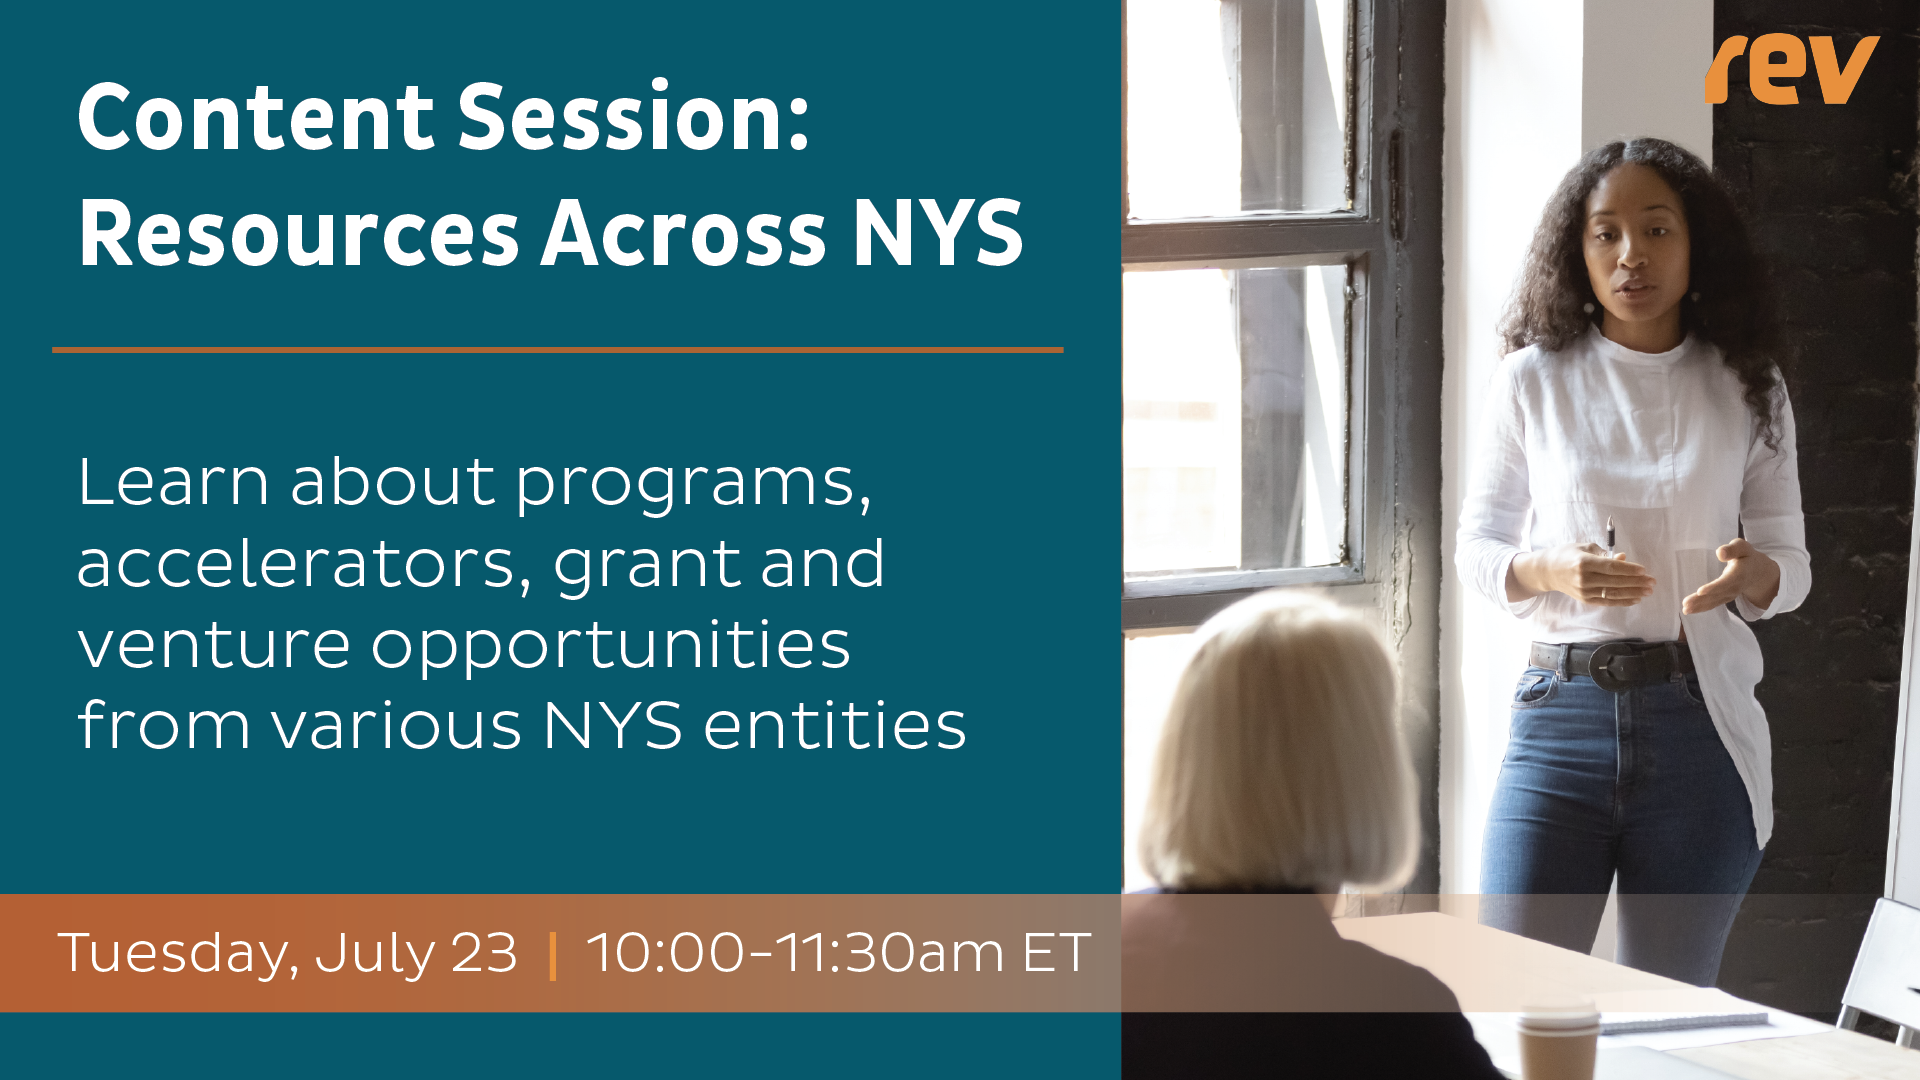 Learn about programs, accelerators, grant, and venture opportunities from various NYS entities.